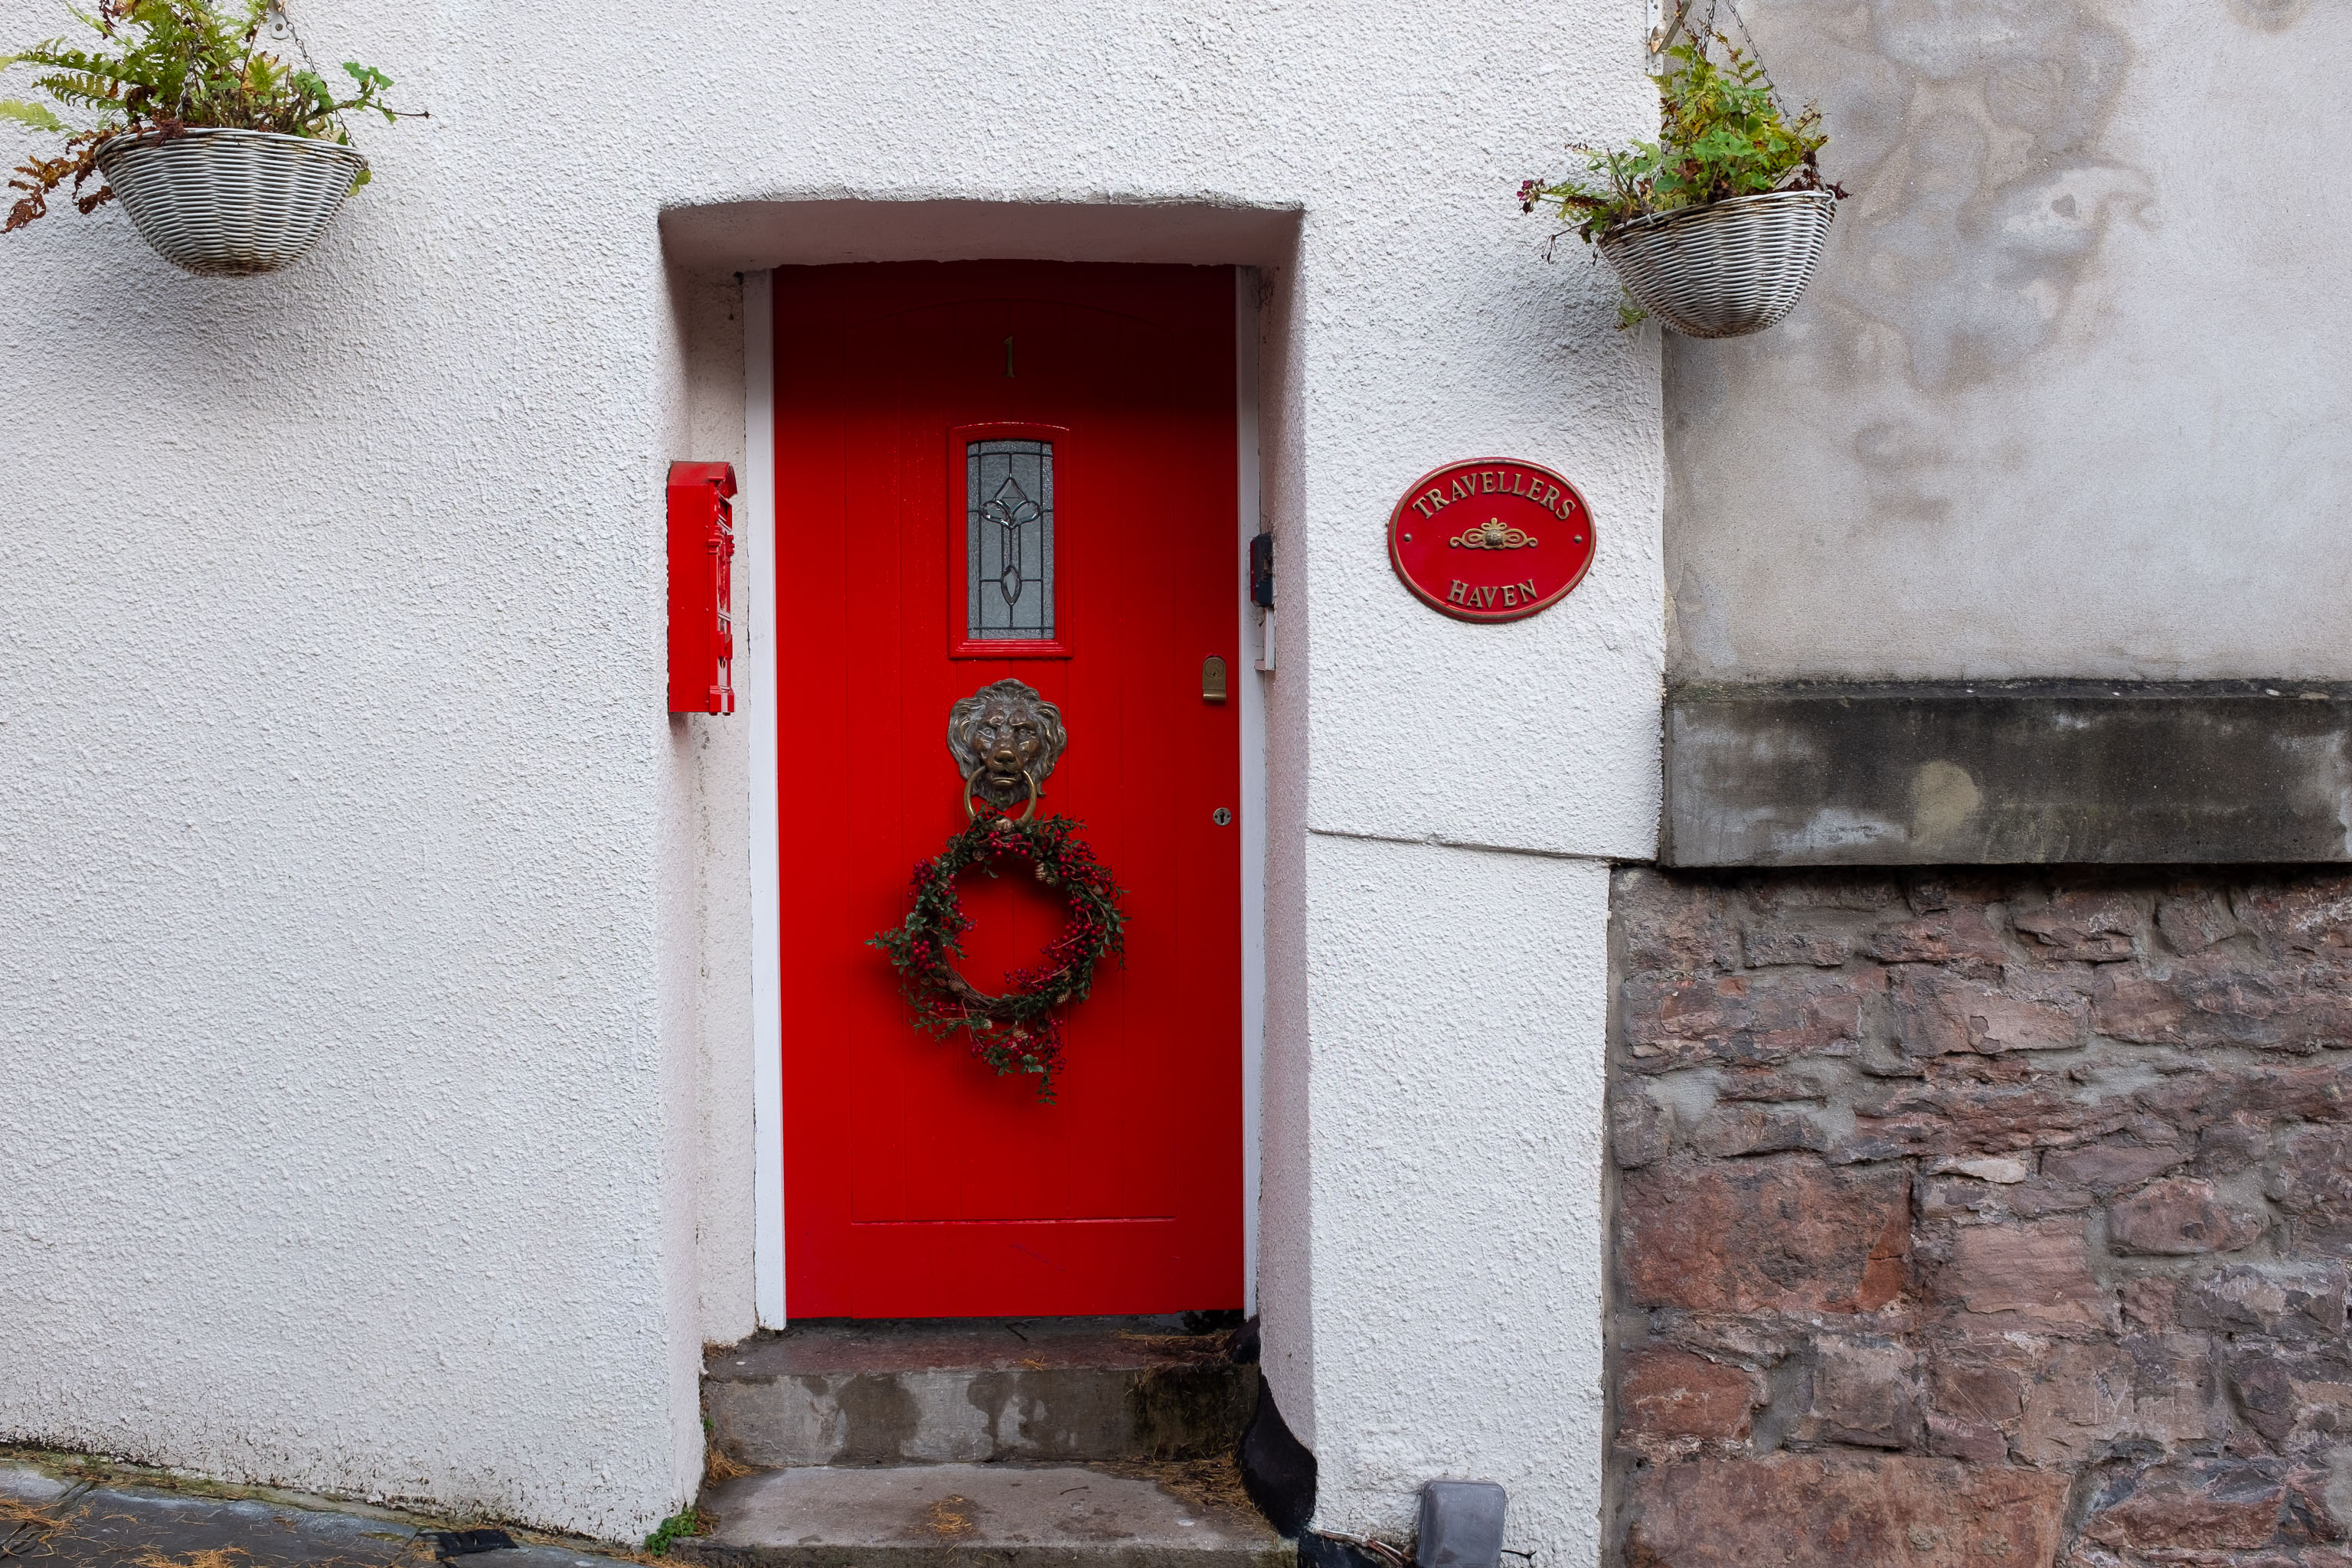 Travellers Haven
It's such a bold red, you can't really help but snap this doorway if you go past with a camera.
